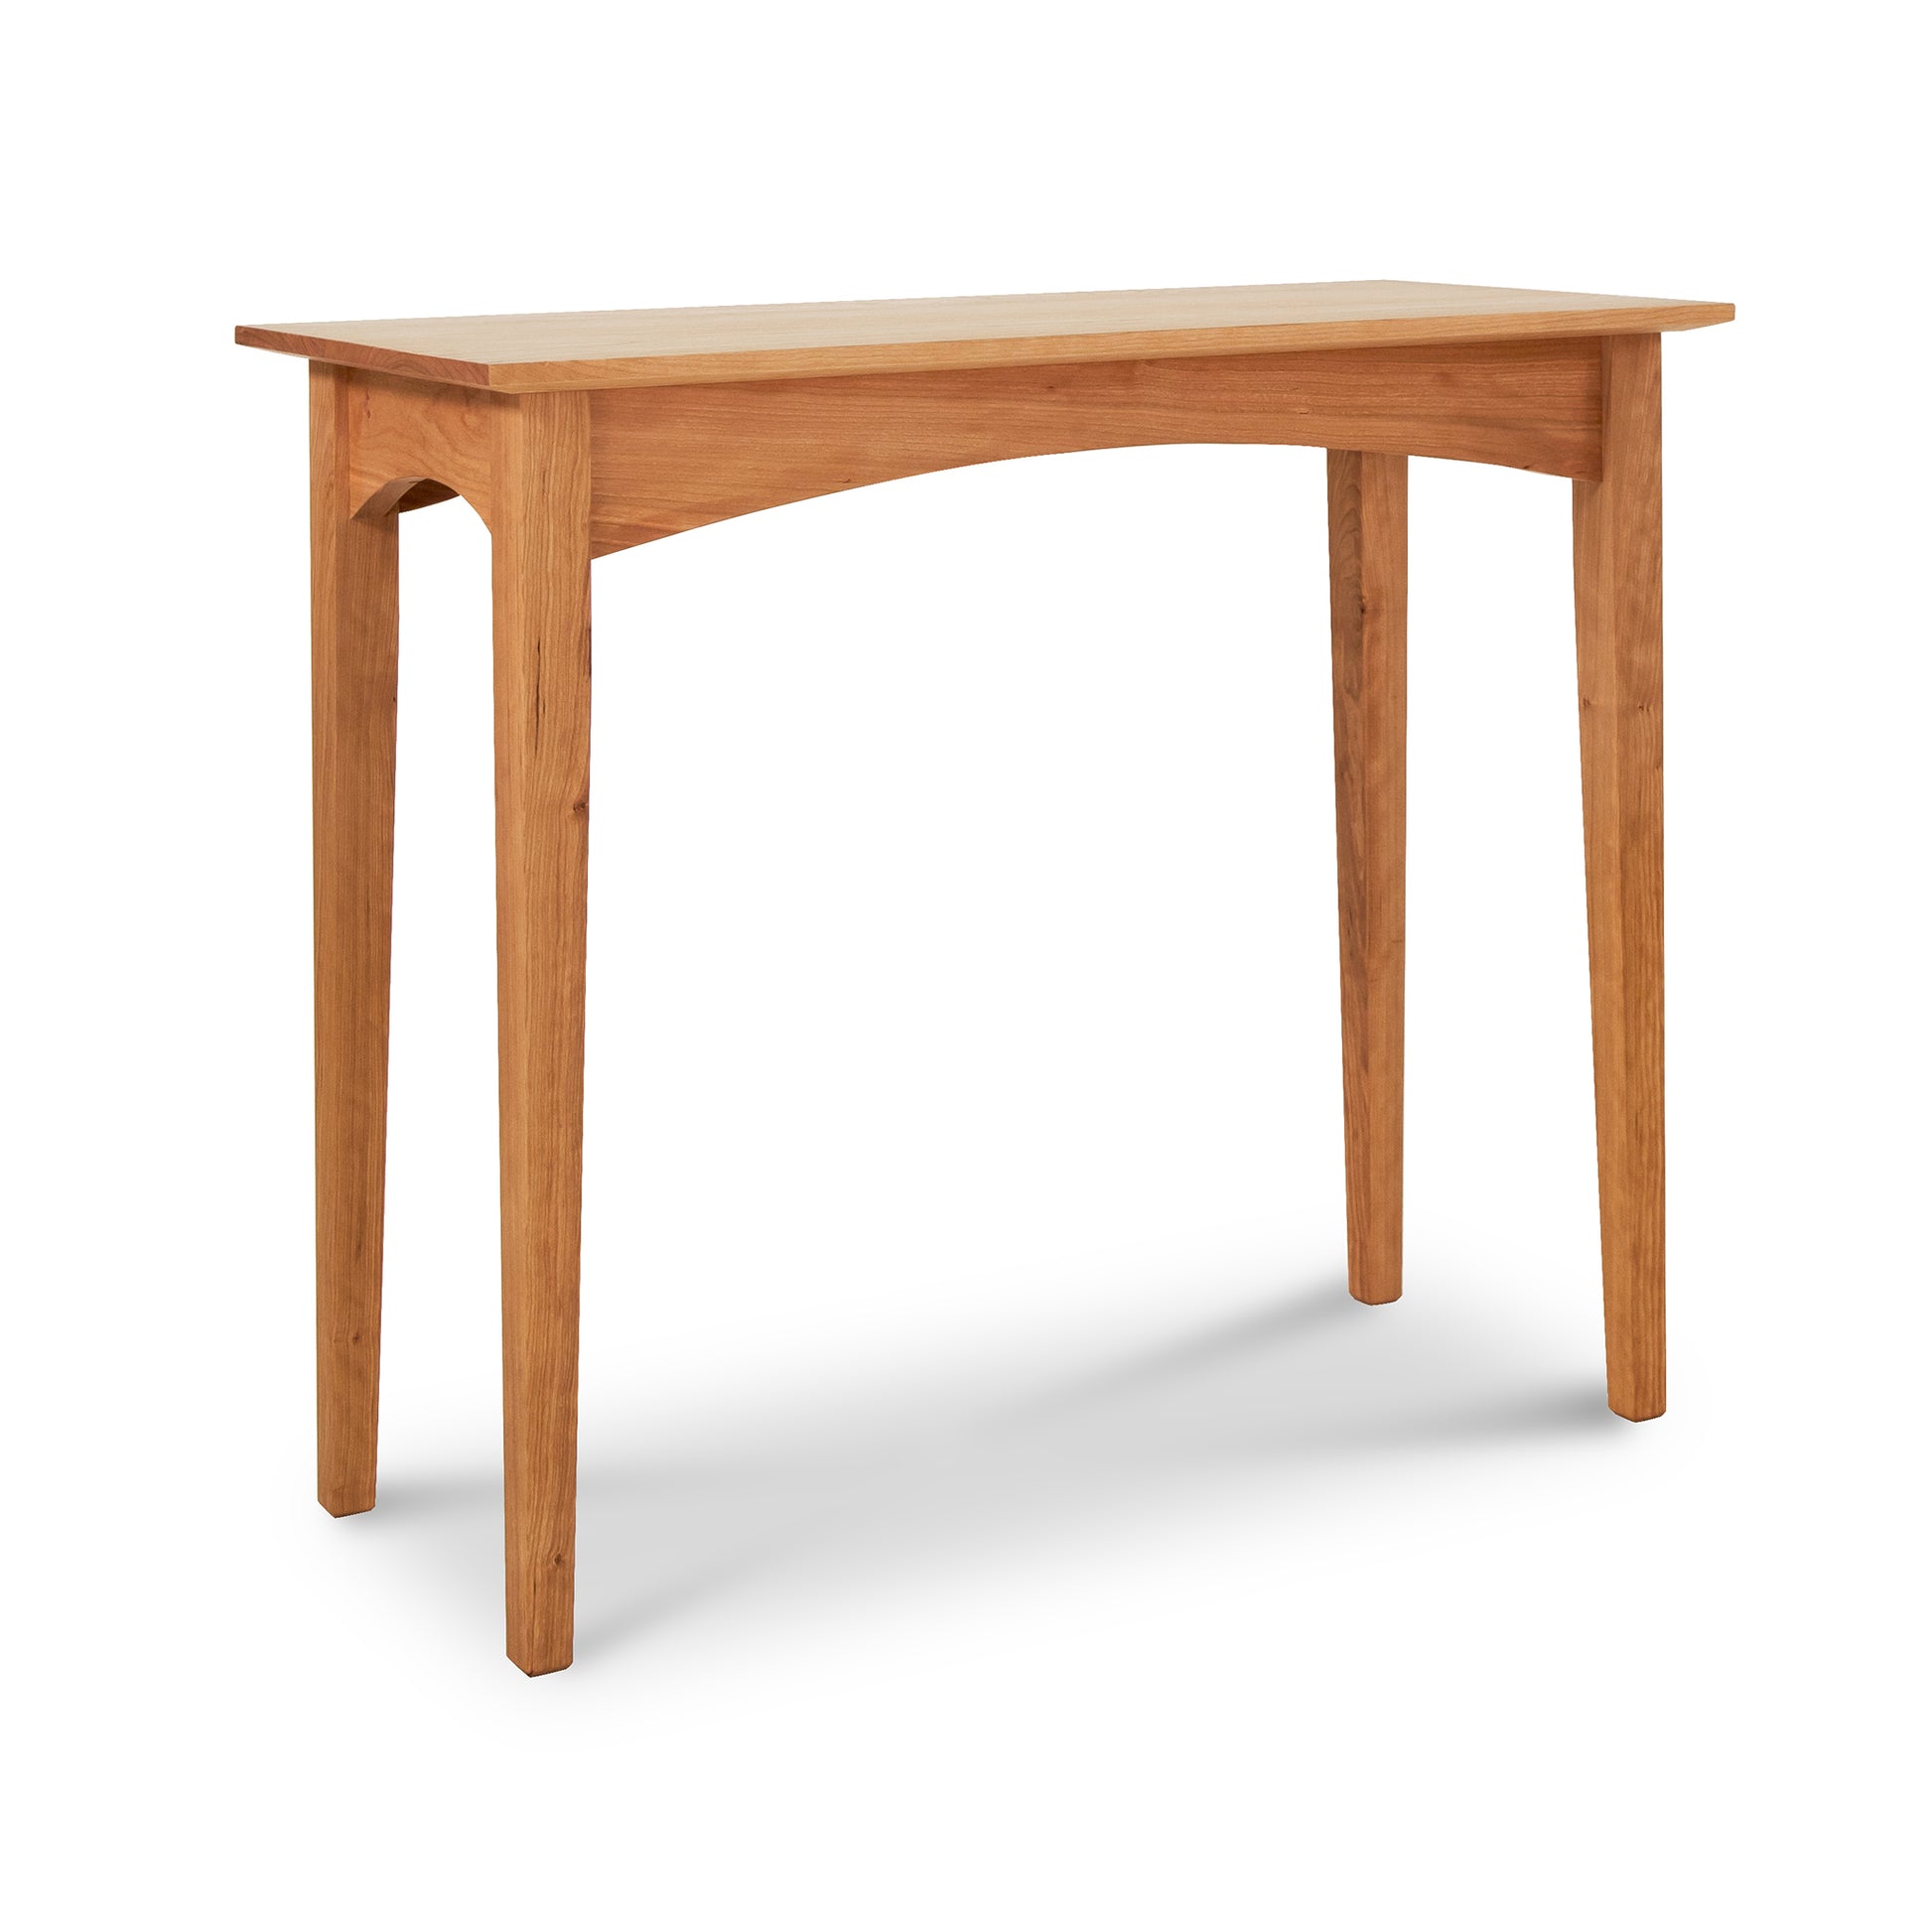 Maple Corner Woodworks American Shaker Sofa Table isolated on a white background.